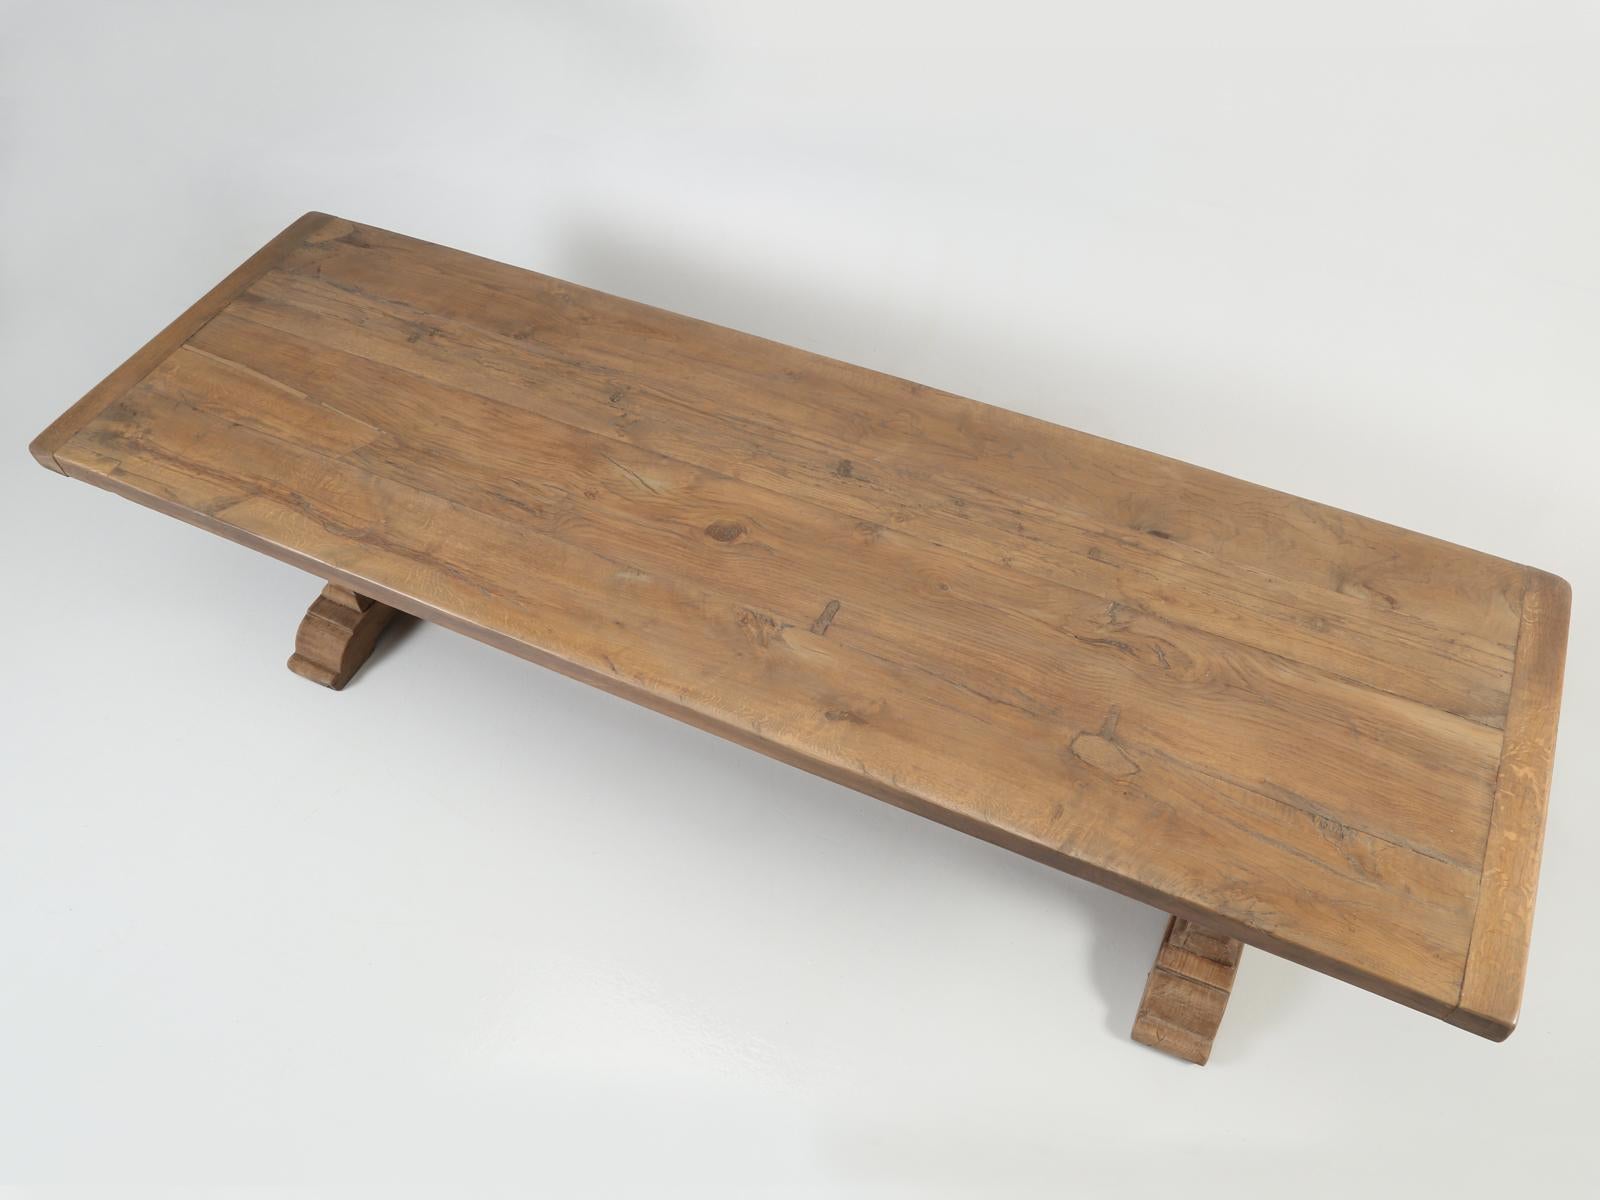 Antique French white oak trestle style dining table or Country French farm table, with exactly the look everyone is searching for today, except this French dining table was handcrafted over 150-years ago. Judging by the amount of patina and basic